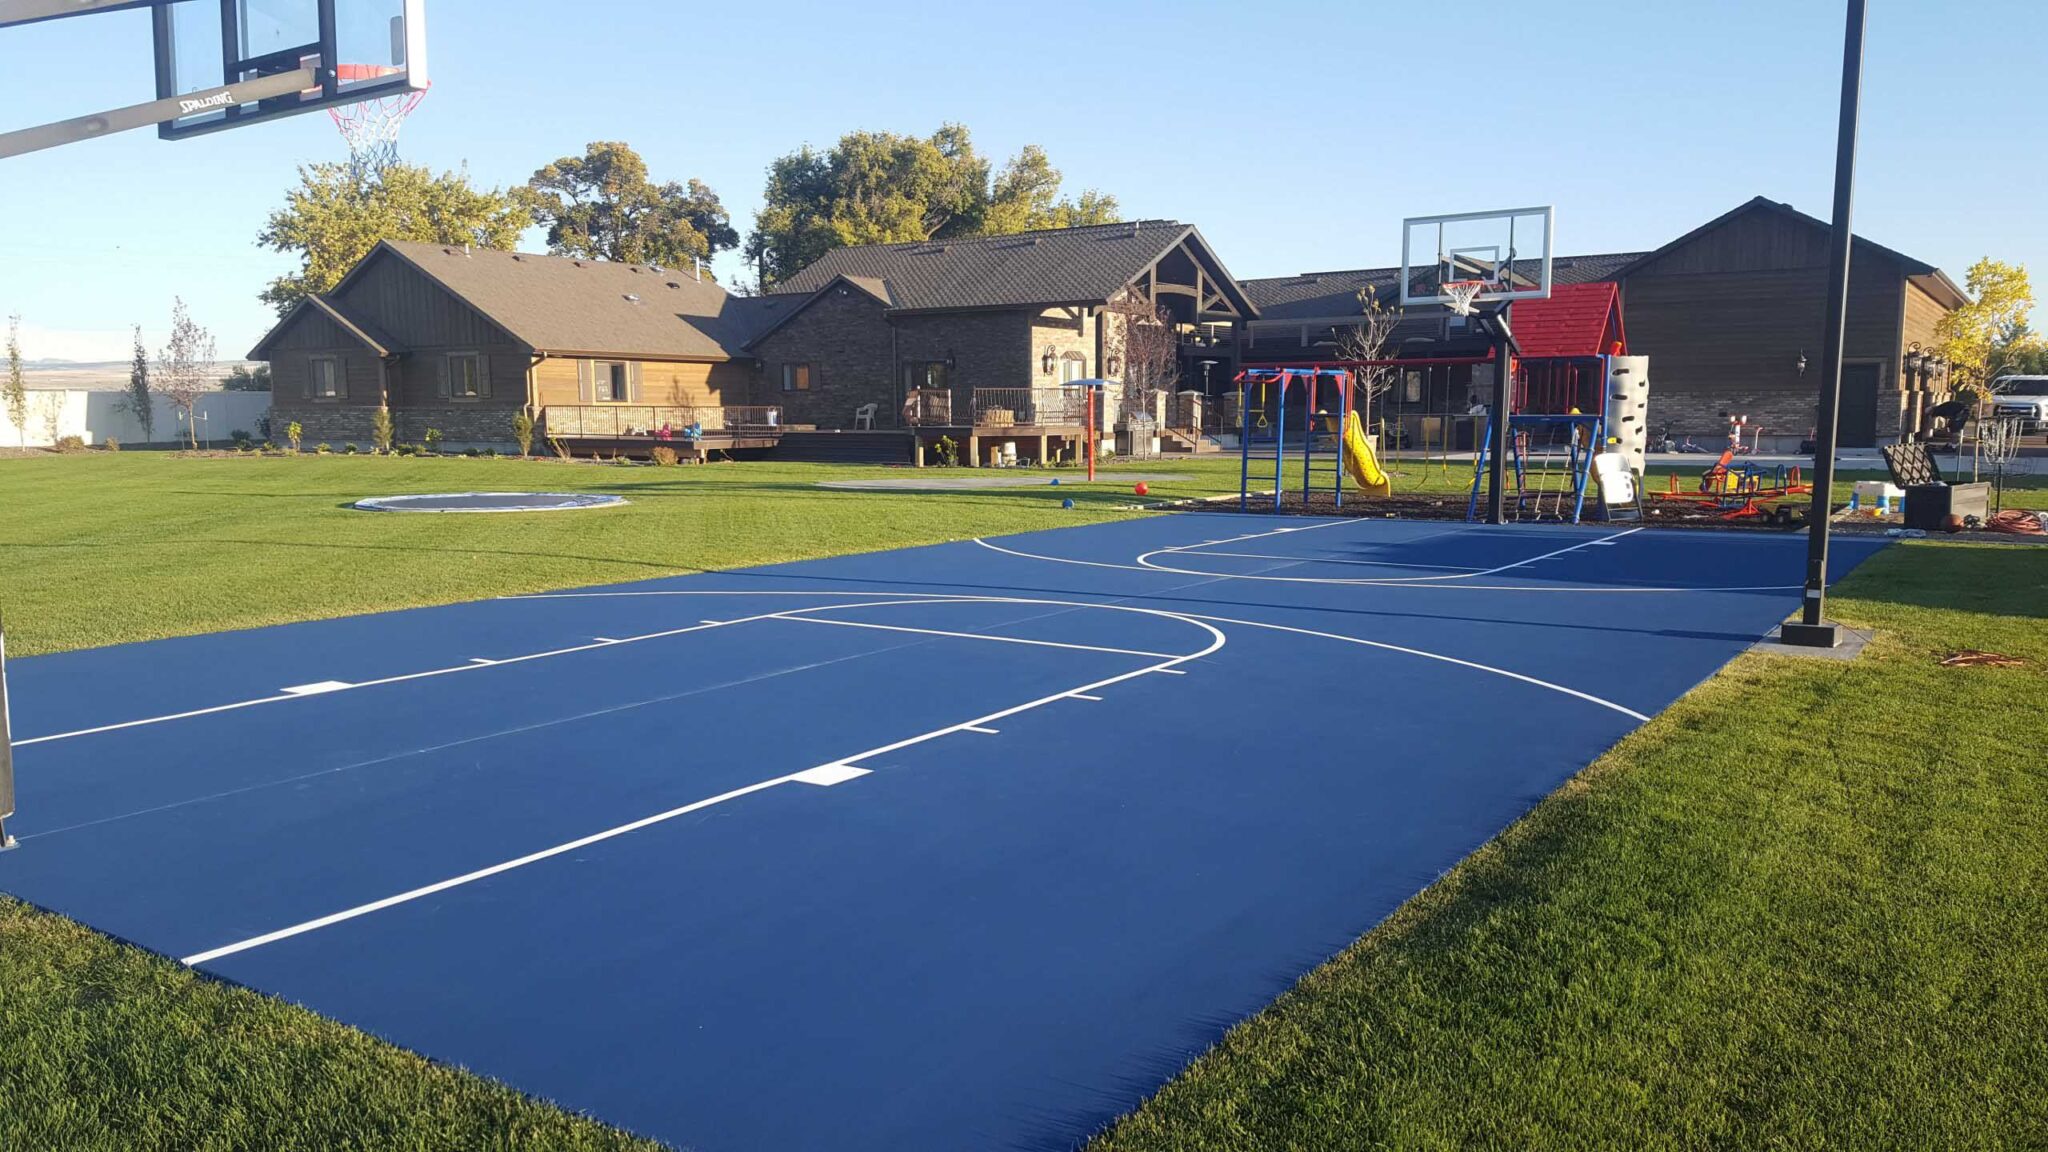 A newly surfaced basketball court in a backyard with blue and white lines.